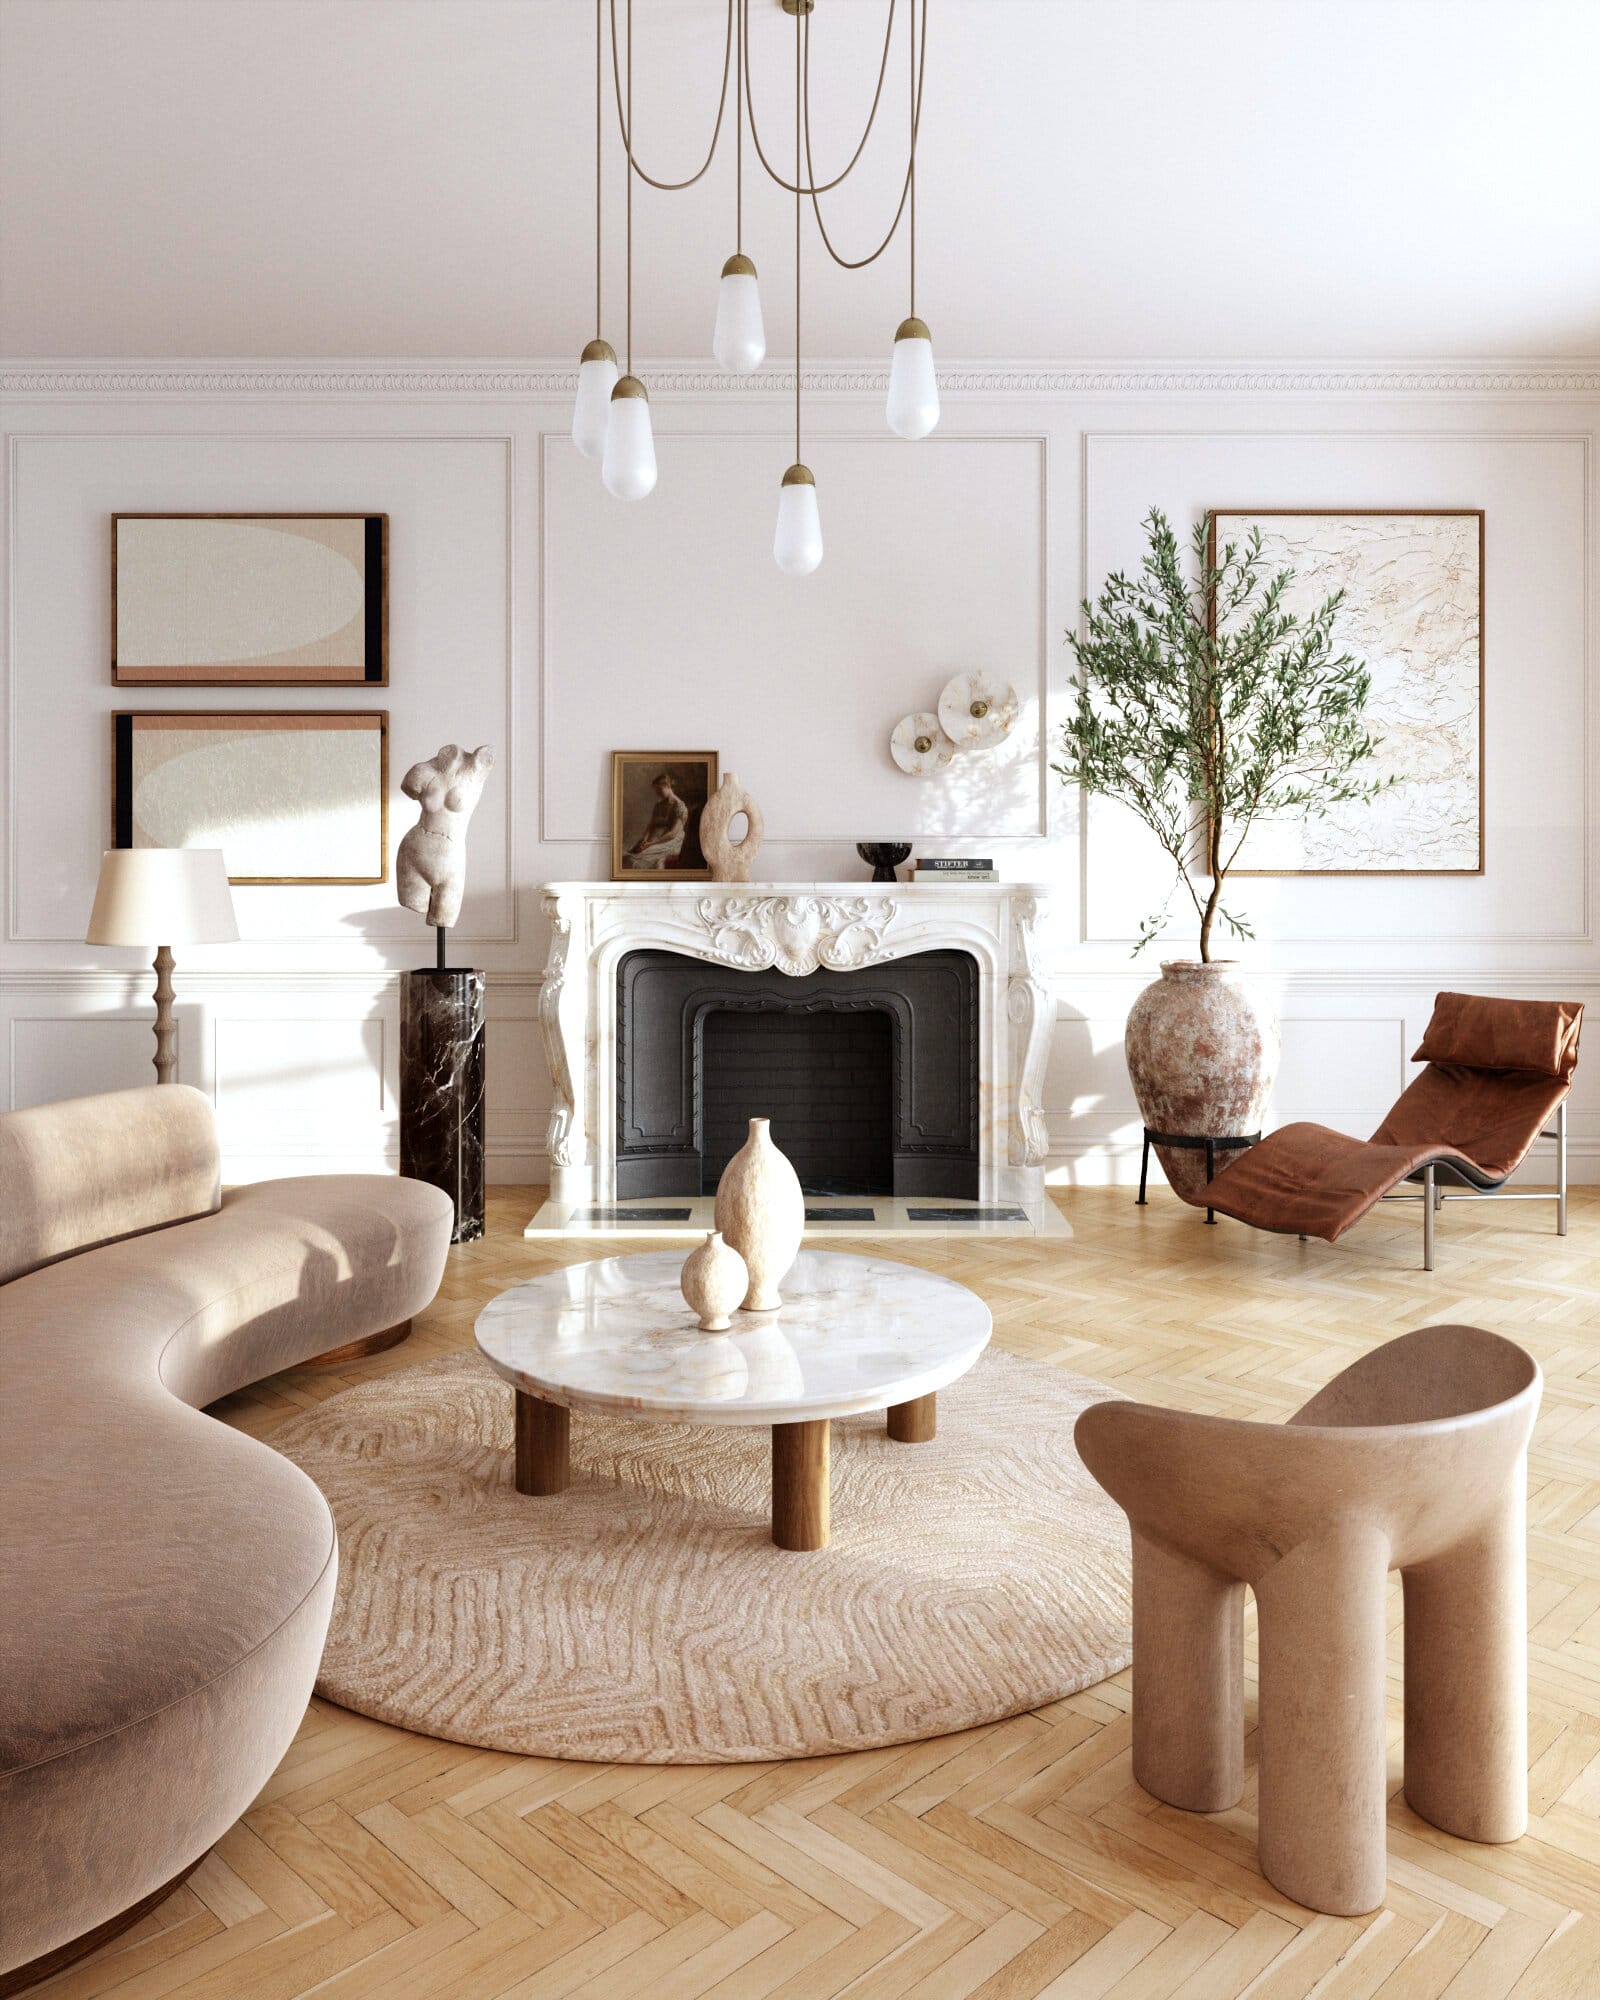 Cozy+Neutral+Home+Styled+With+Earth+Tones